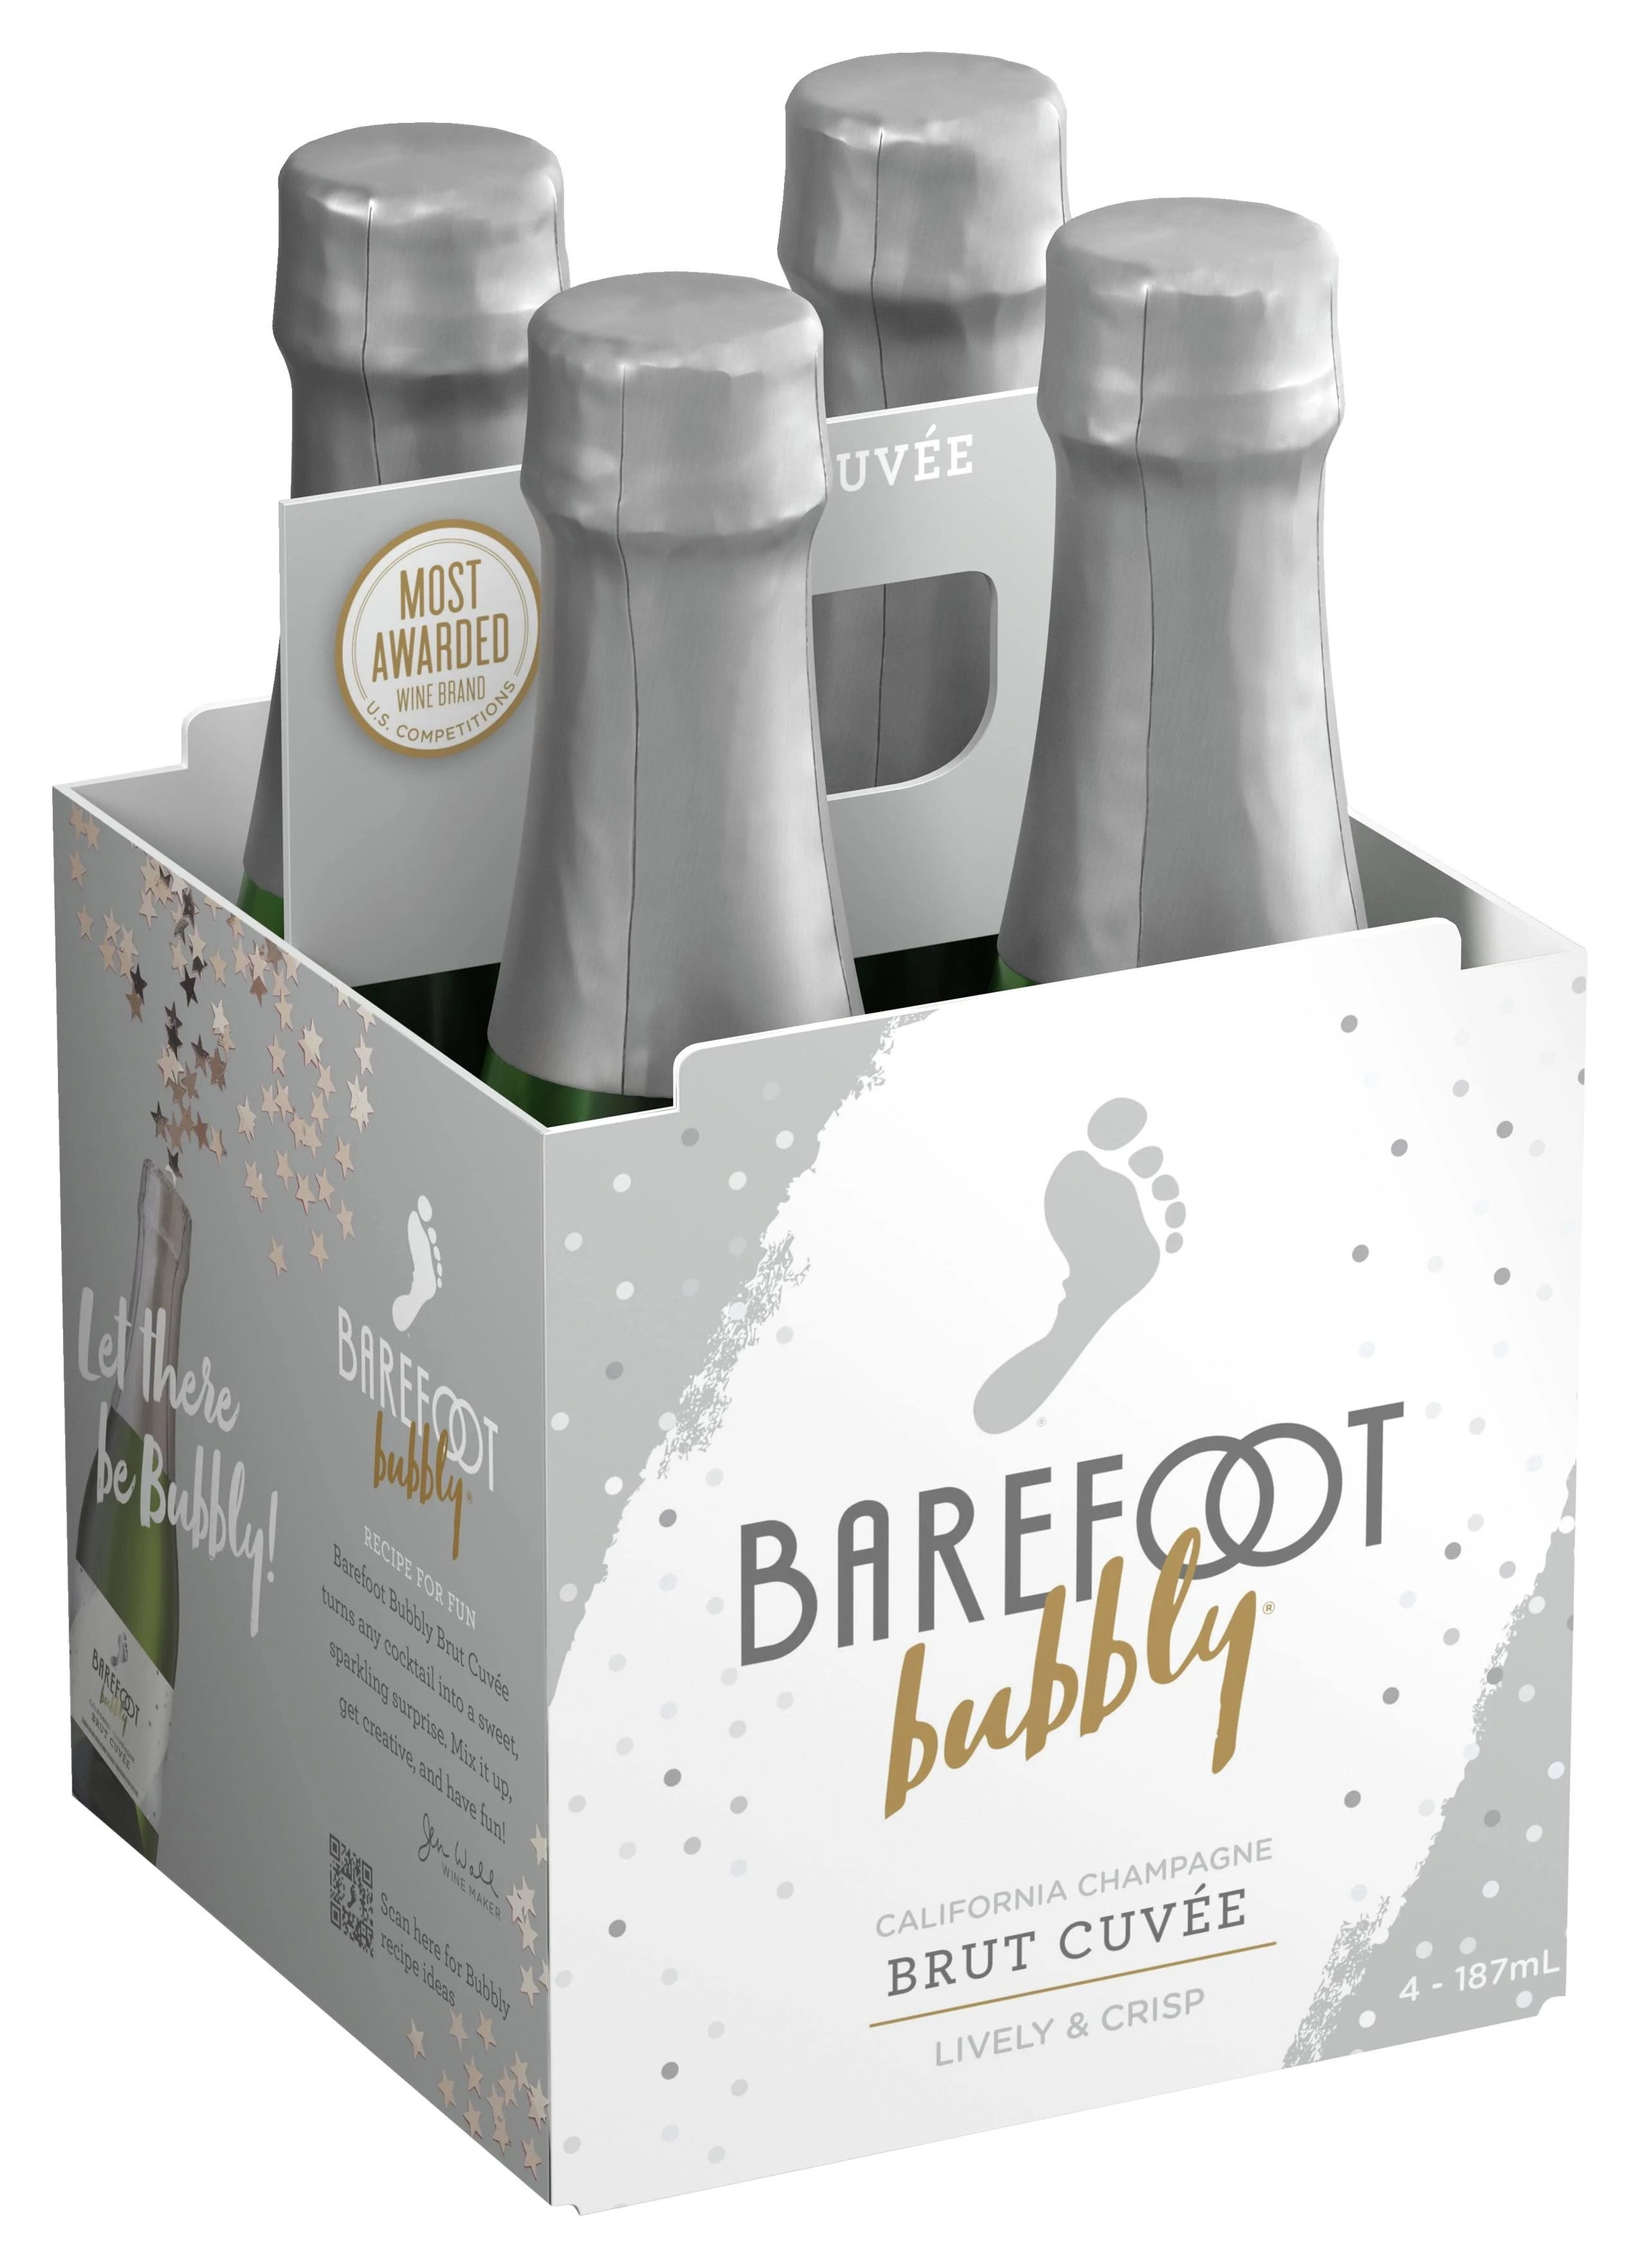 Barefoot Bubbly Brut Cuvee Dry California Champagne - 4 Bottles | Image